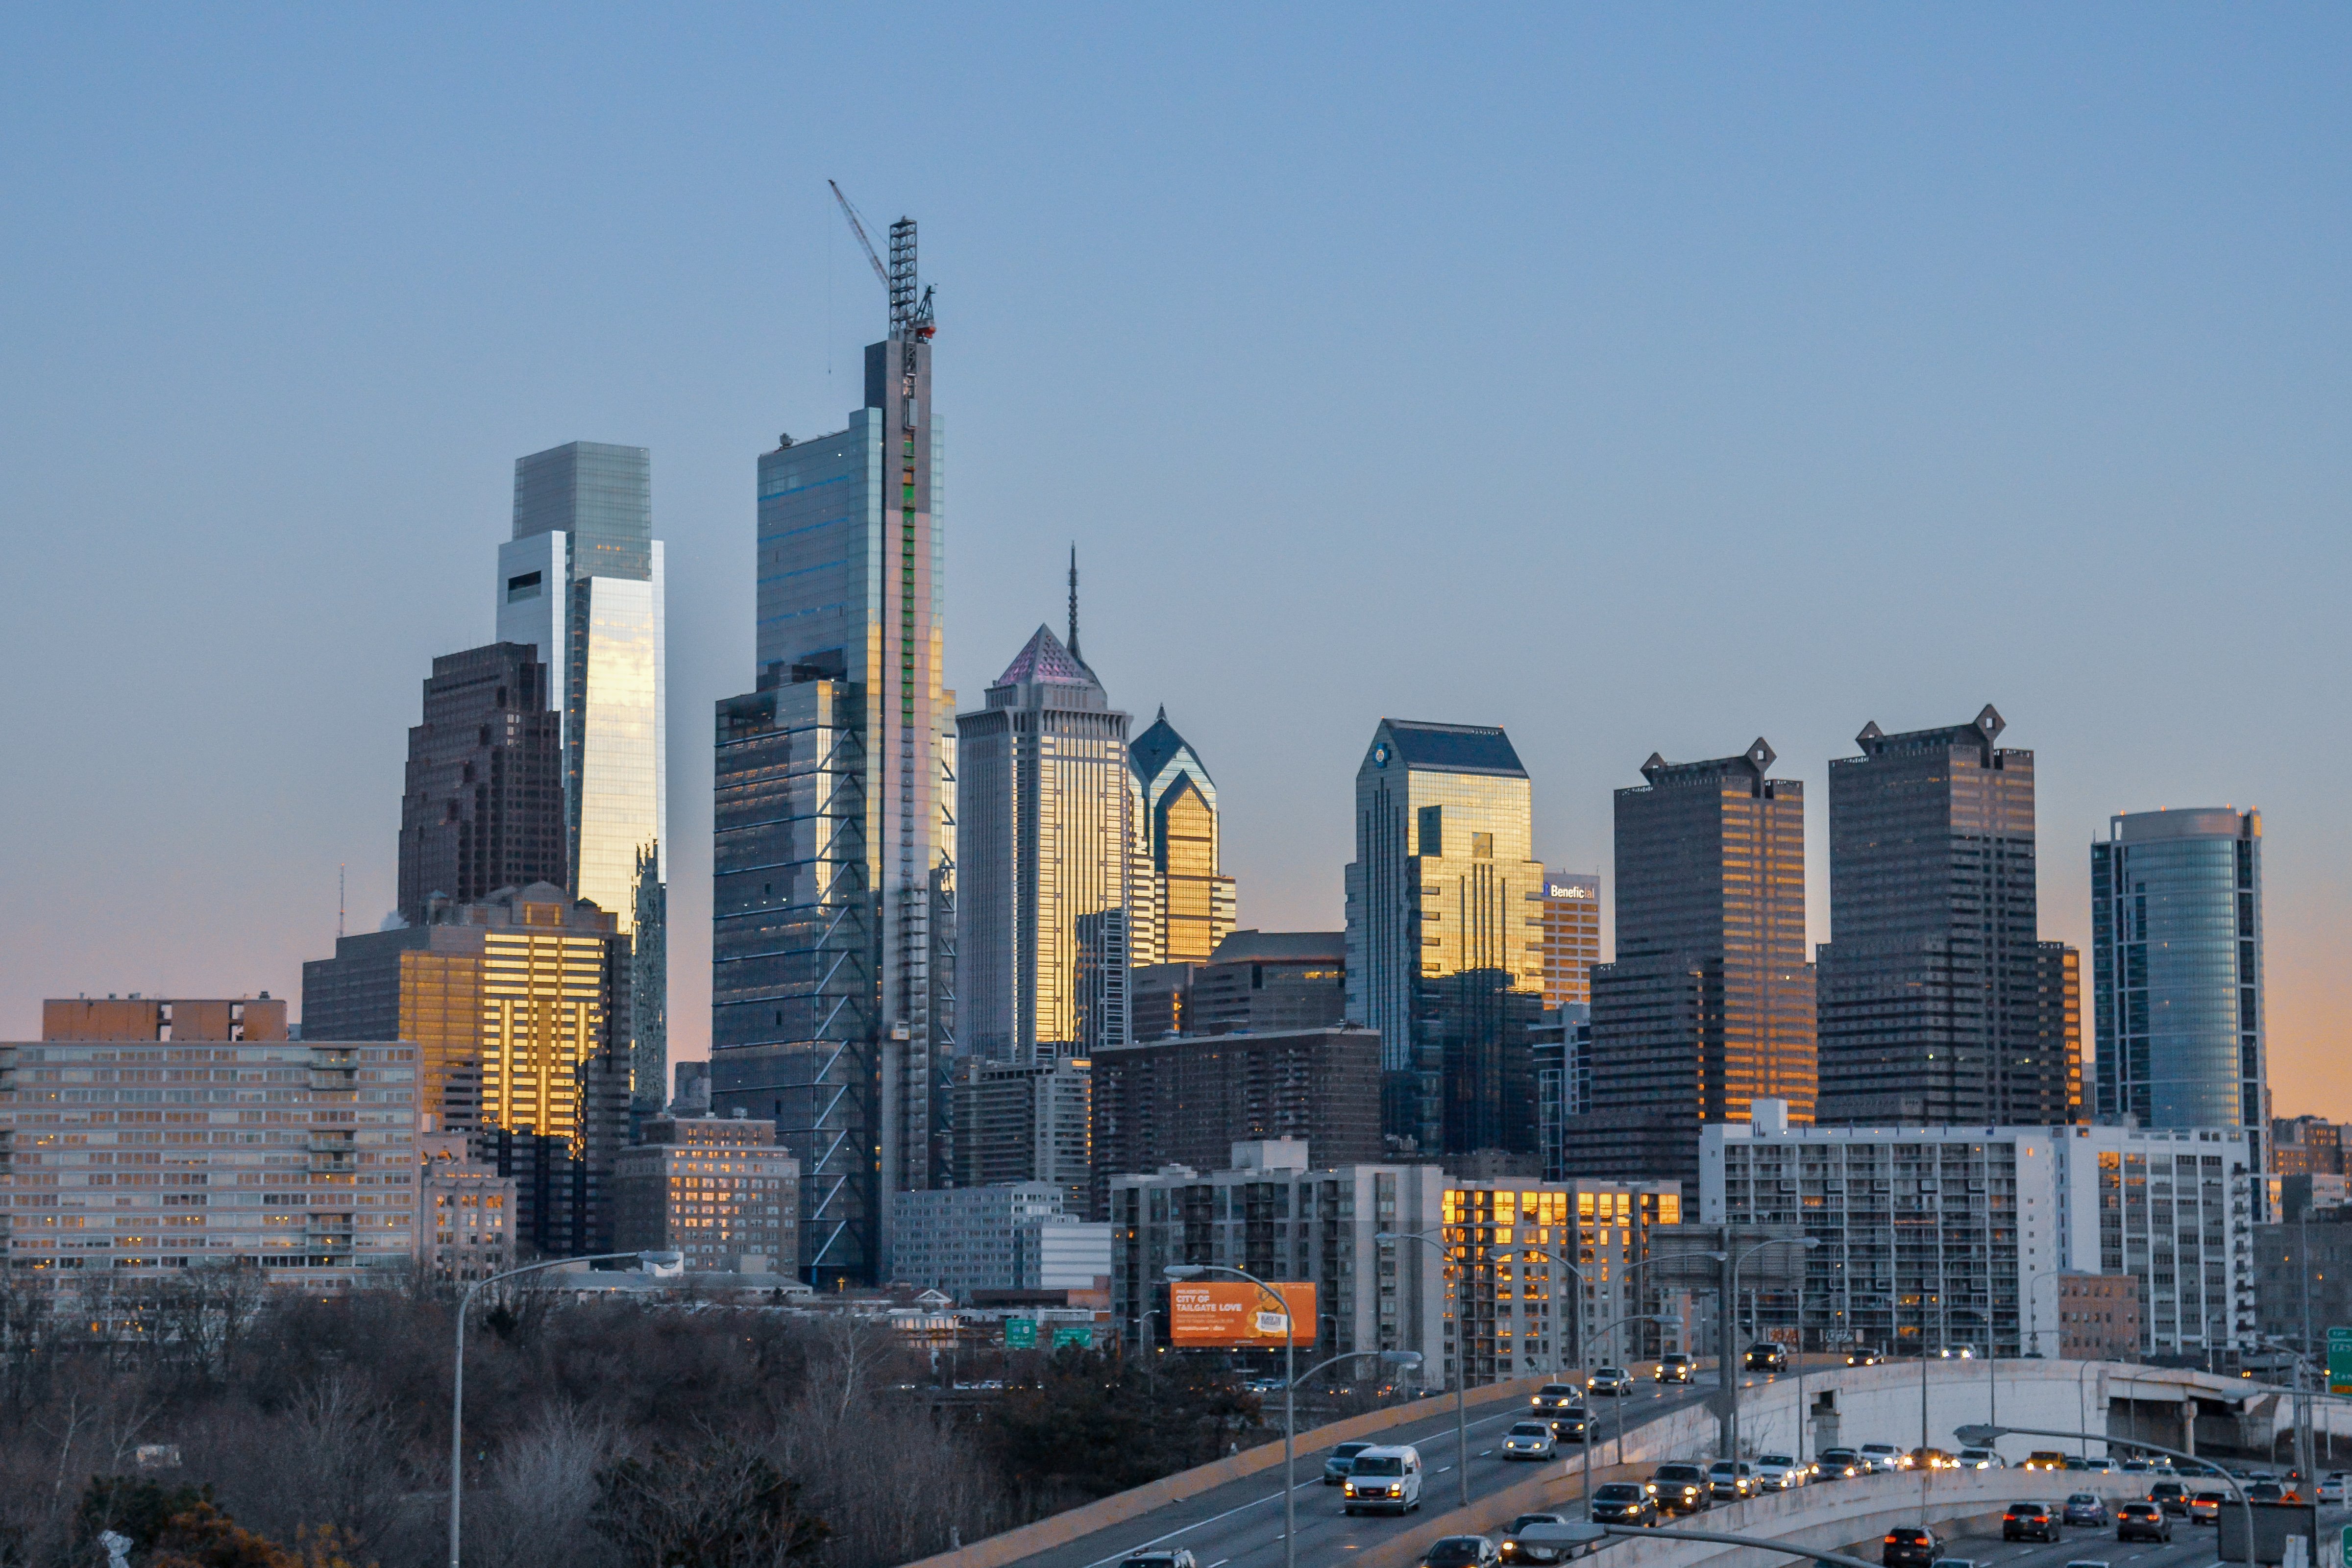 The large Philadelphia skyline right at sunset by Drexel University|Photo: Getty Images